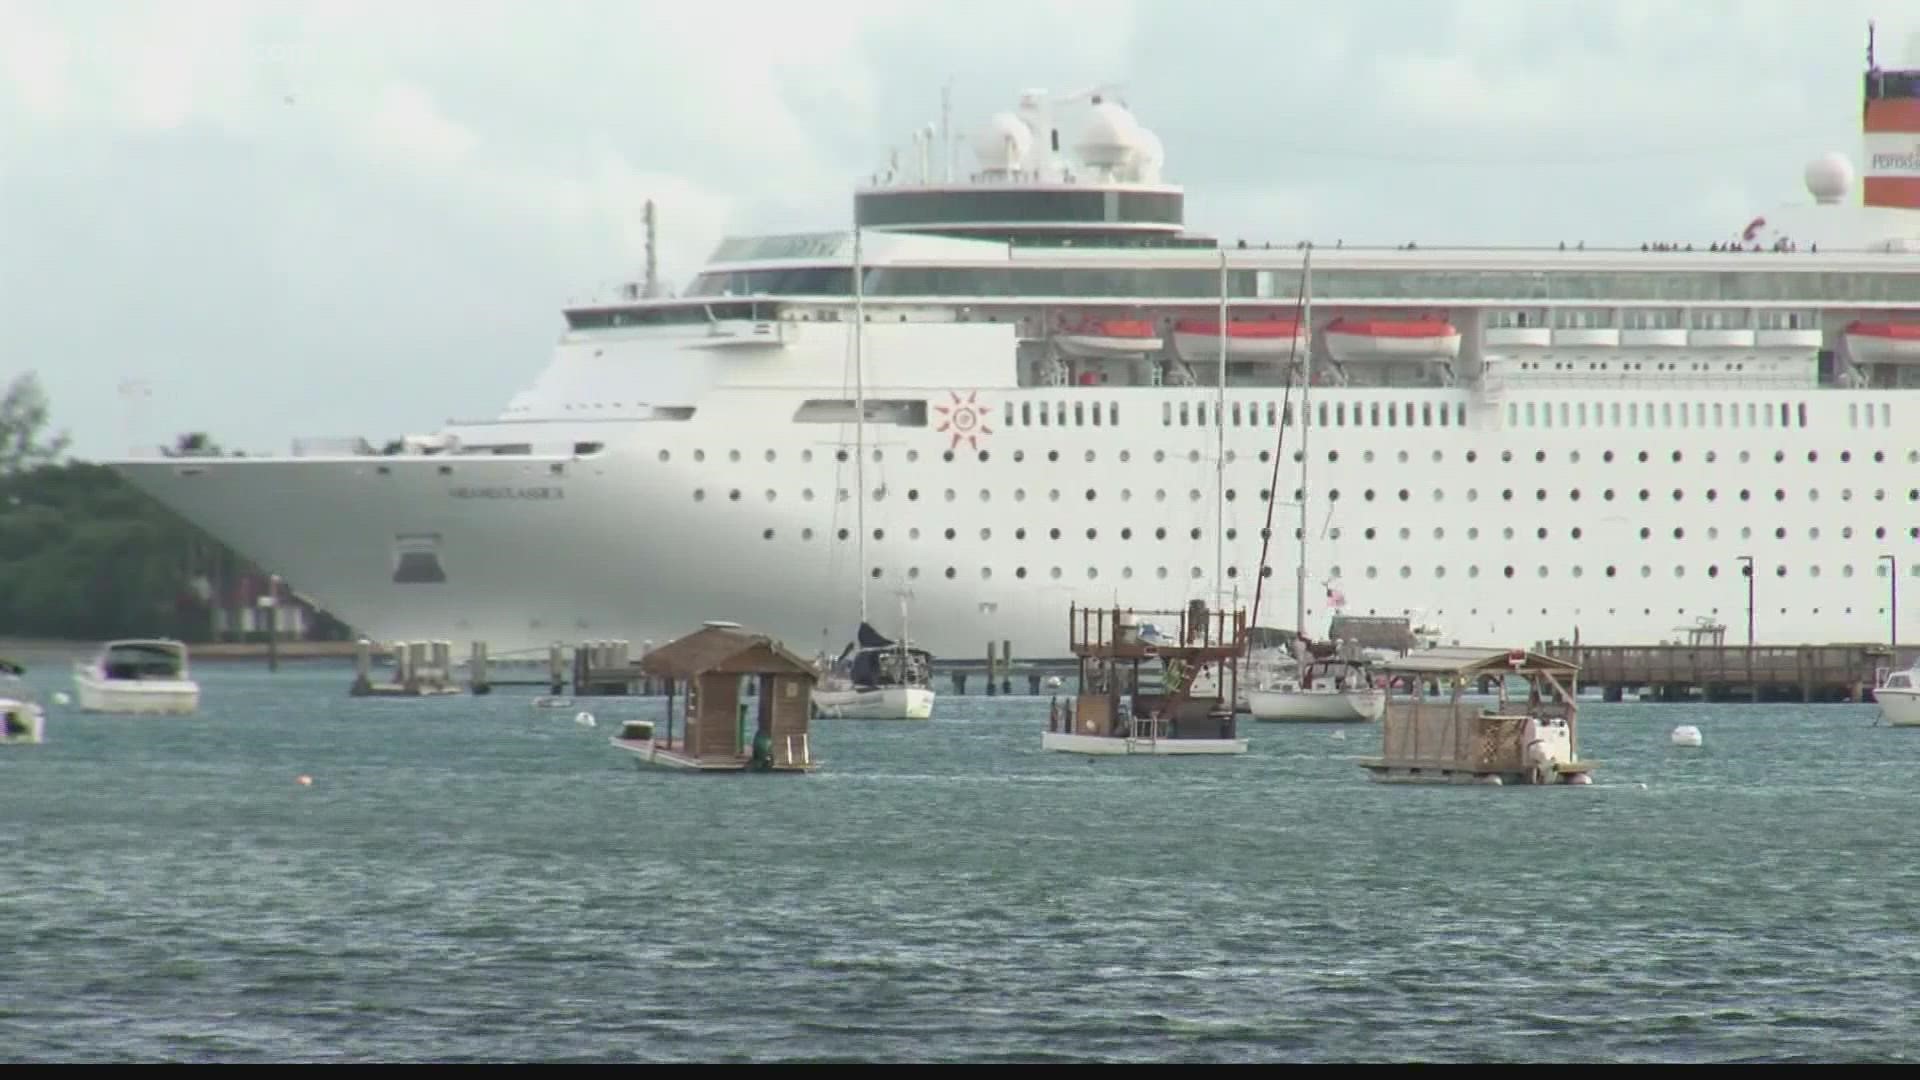 A federal judge has sided with Norwegian Cruise Line in its battle with Florida over requiring proof that its passengers are vaccinated against COVID-19.